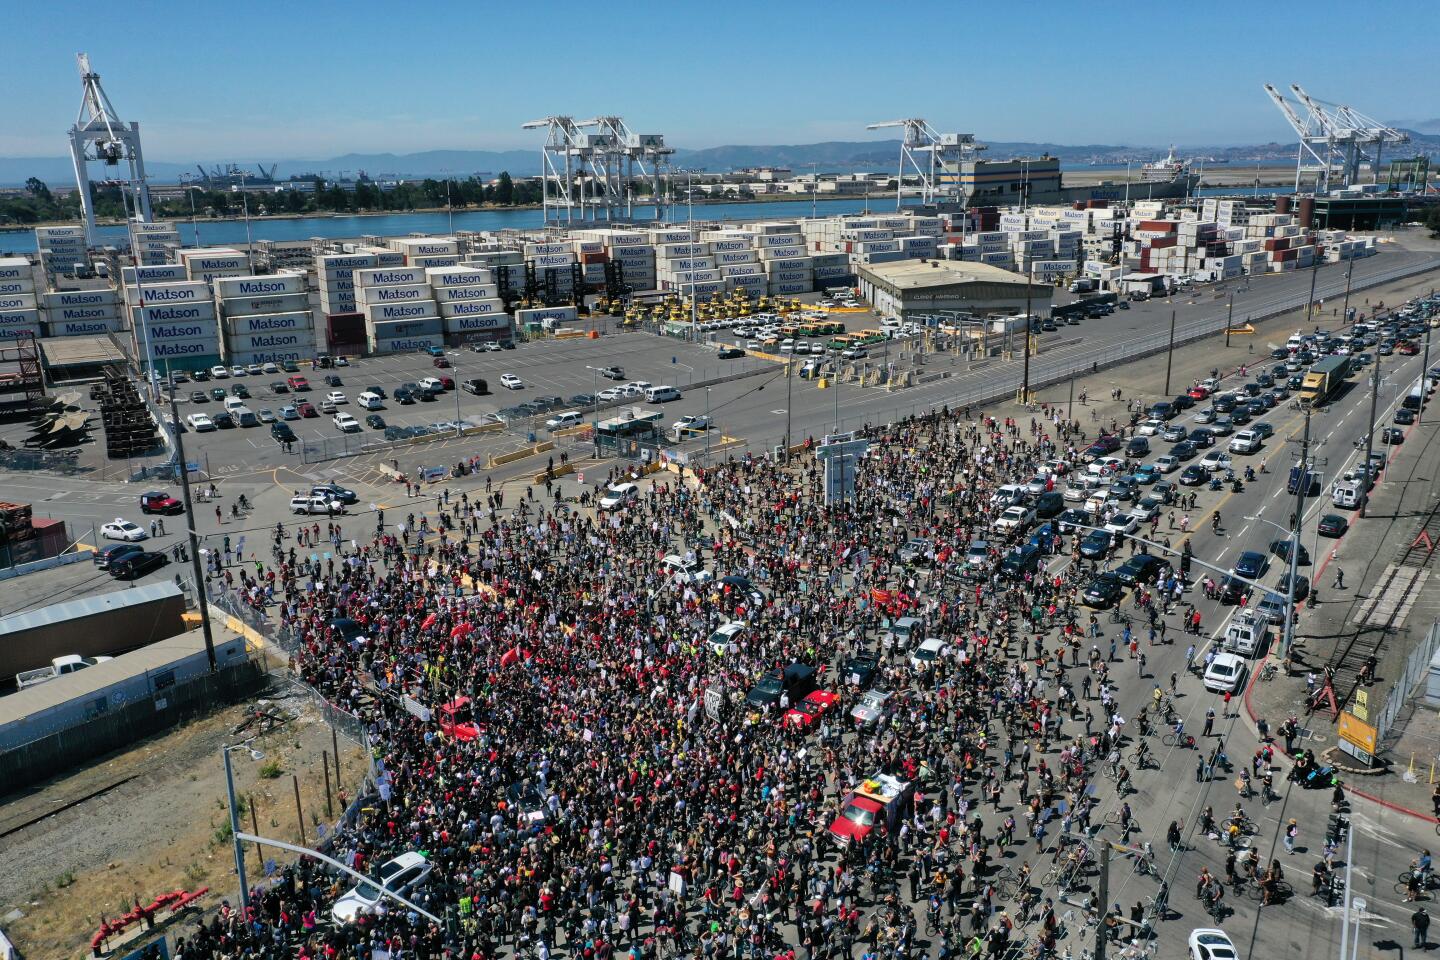 Thousands of union longshoremen and activists attend a Juneteenth rally and march near the port in Oakland.